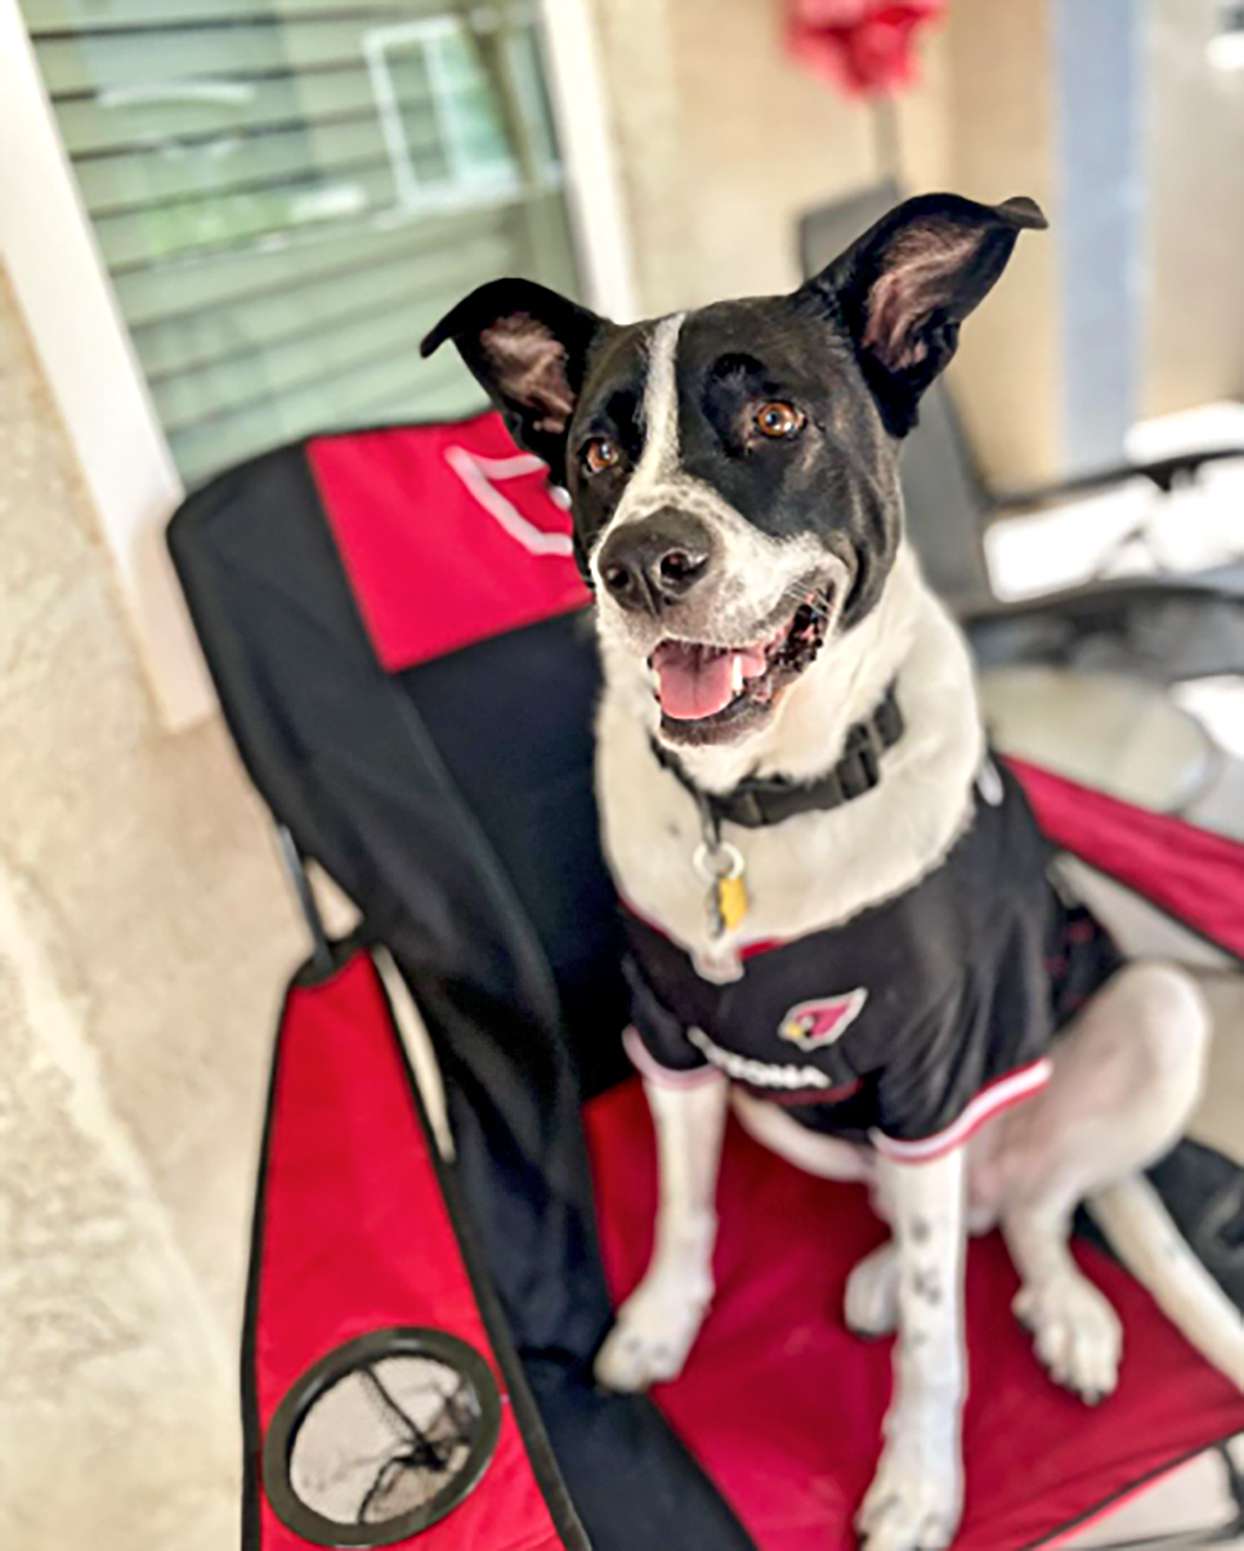 border collie rottweiler mix wearing a sports jersey on a folding chair